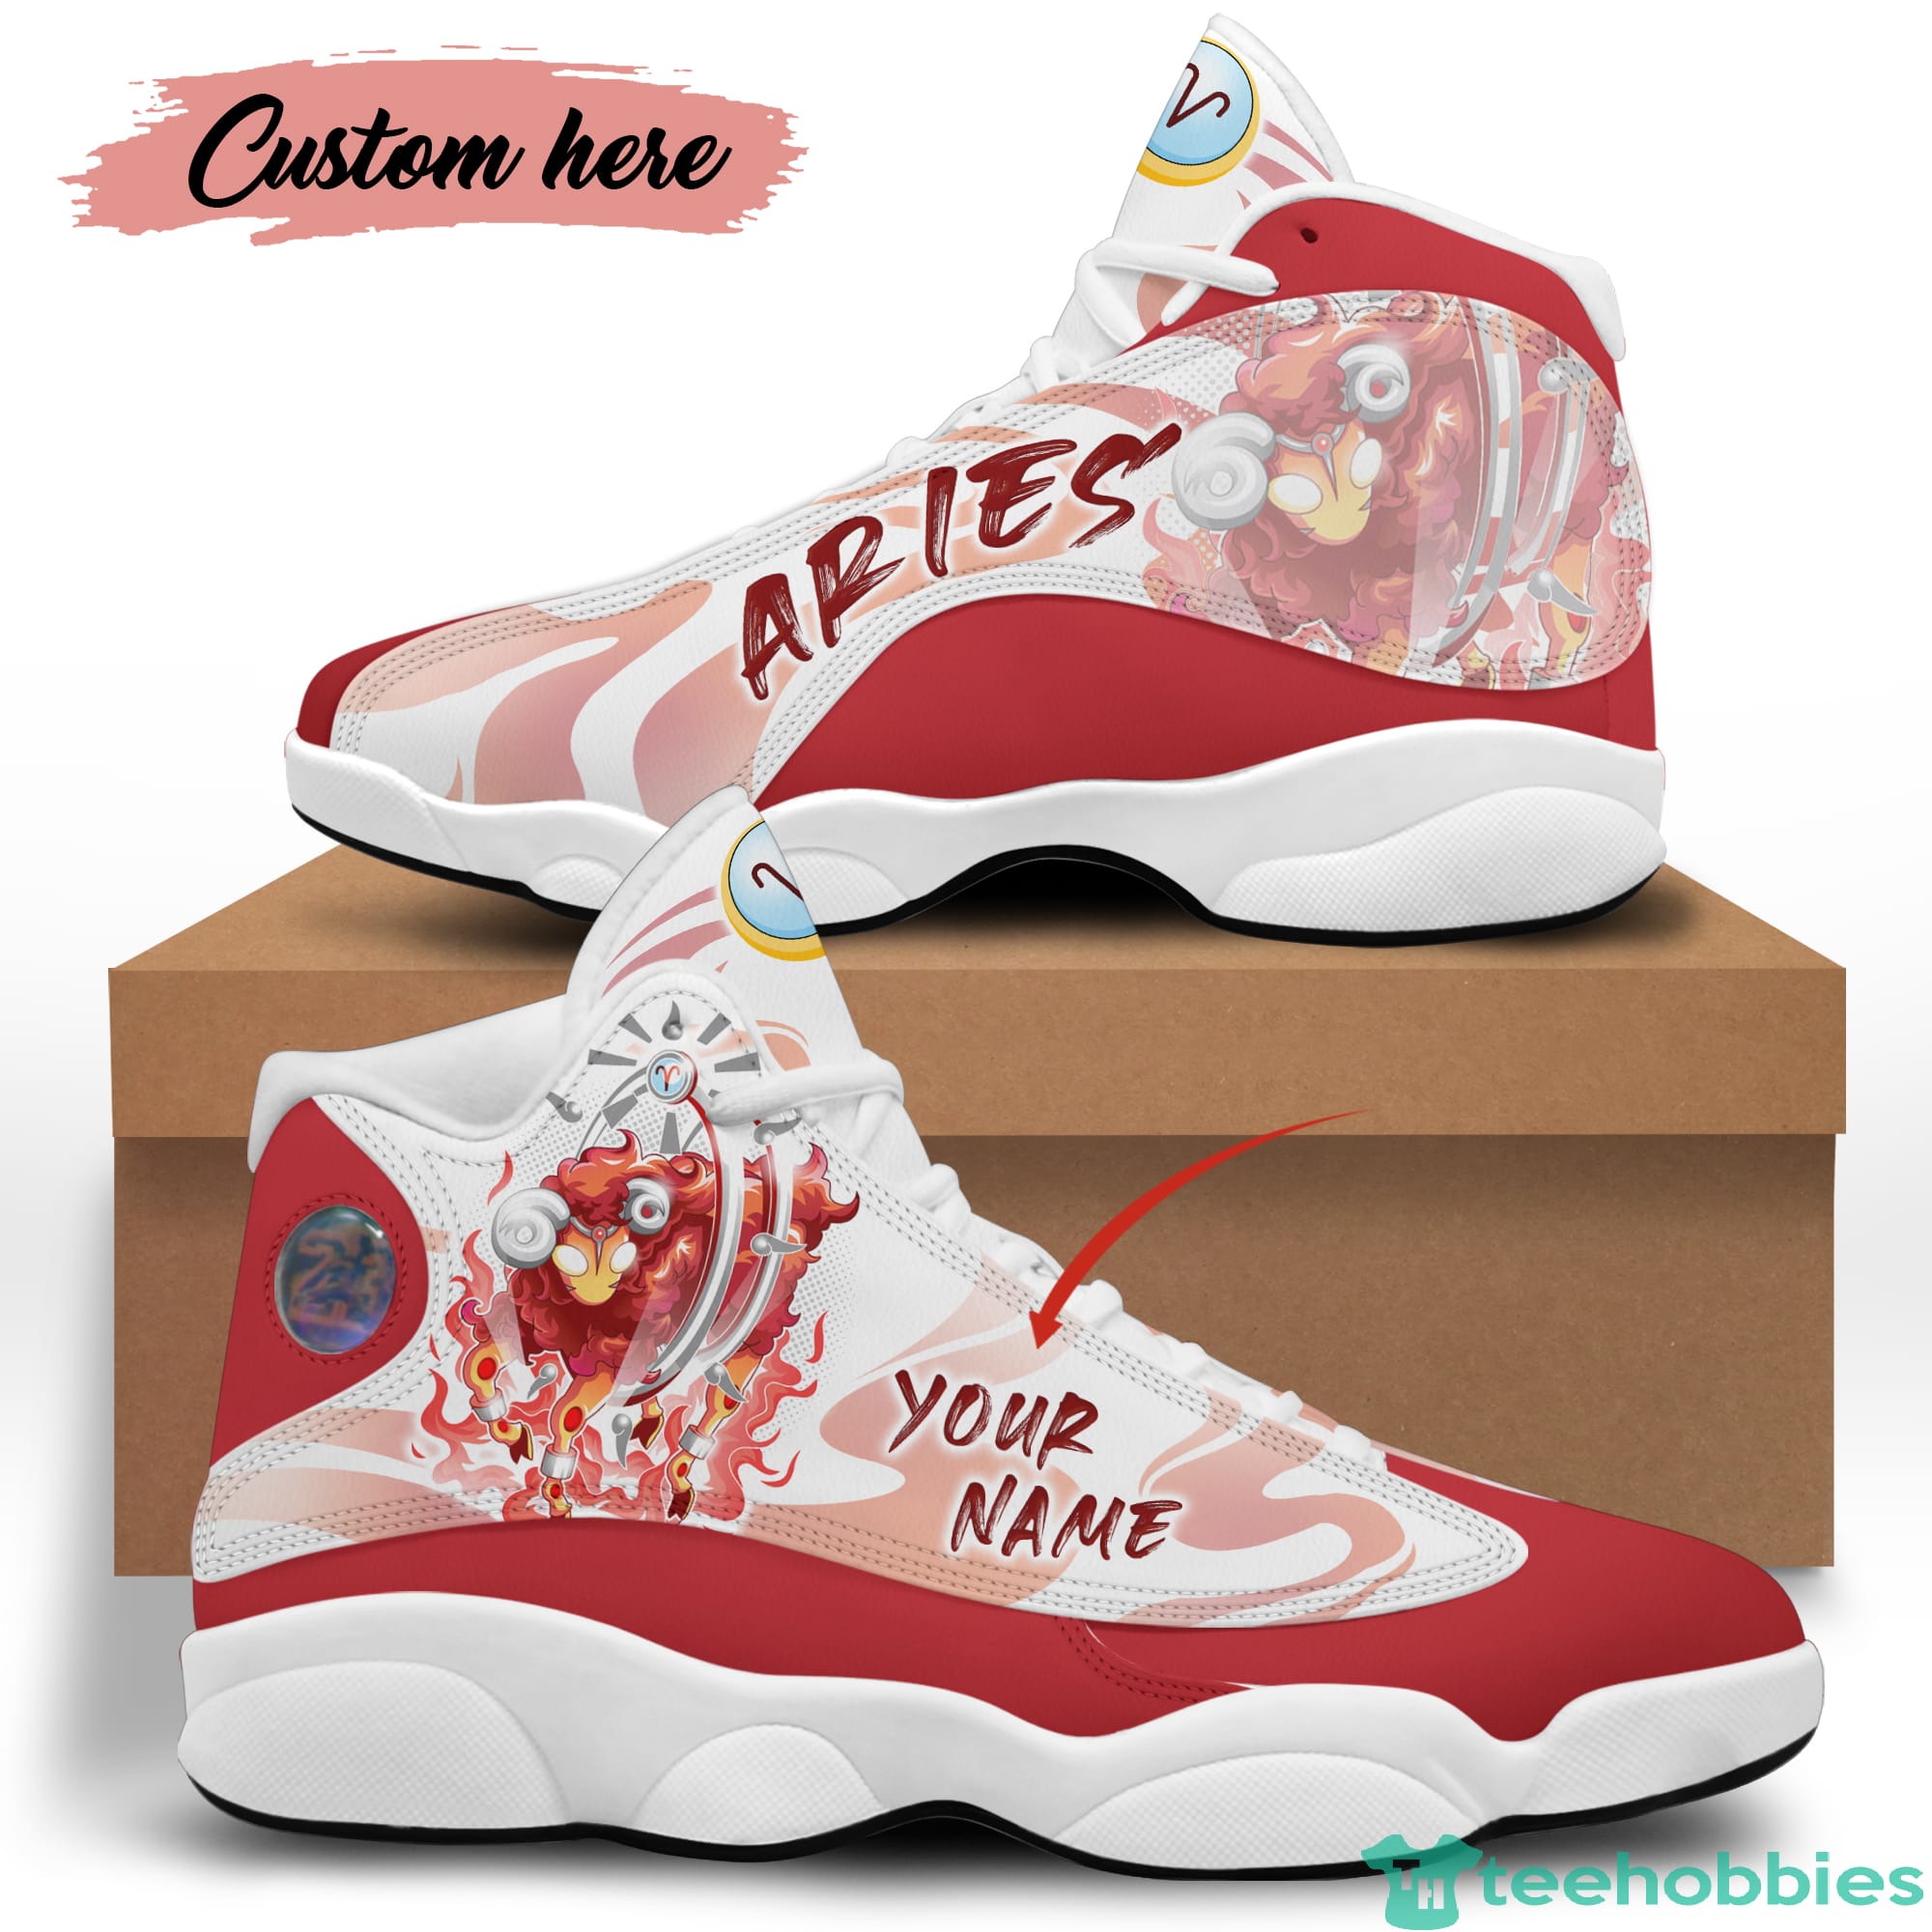 Aries Birthday Gift Personalized Name Personalized Name Air Jordan 13 Shoes SKU-208